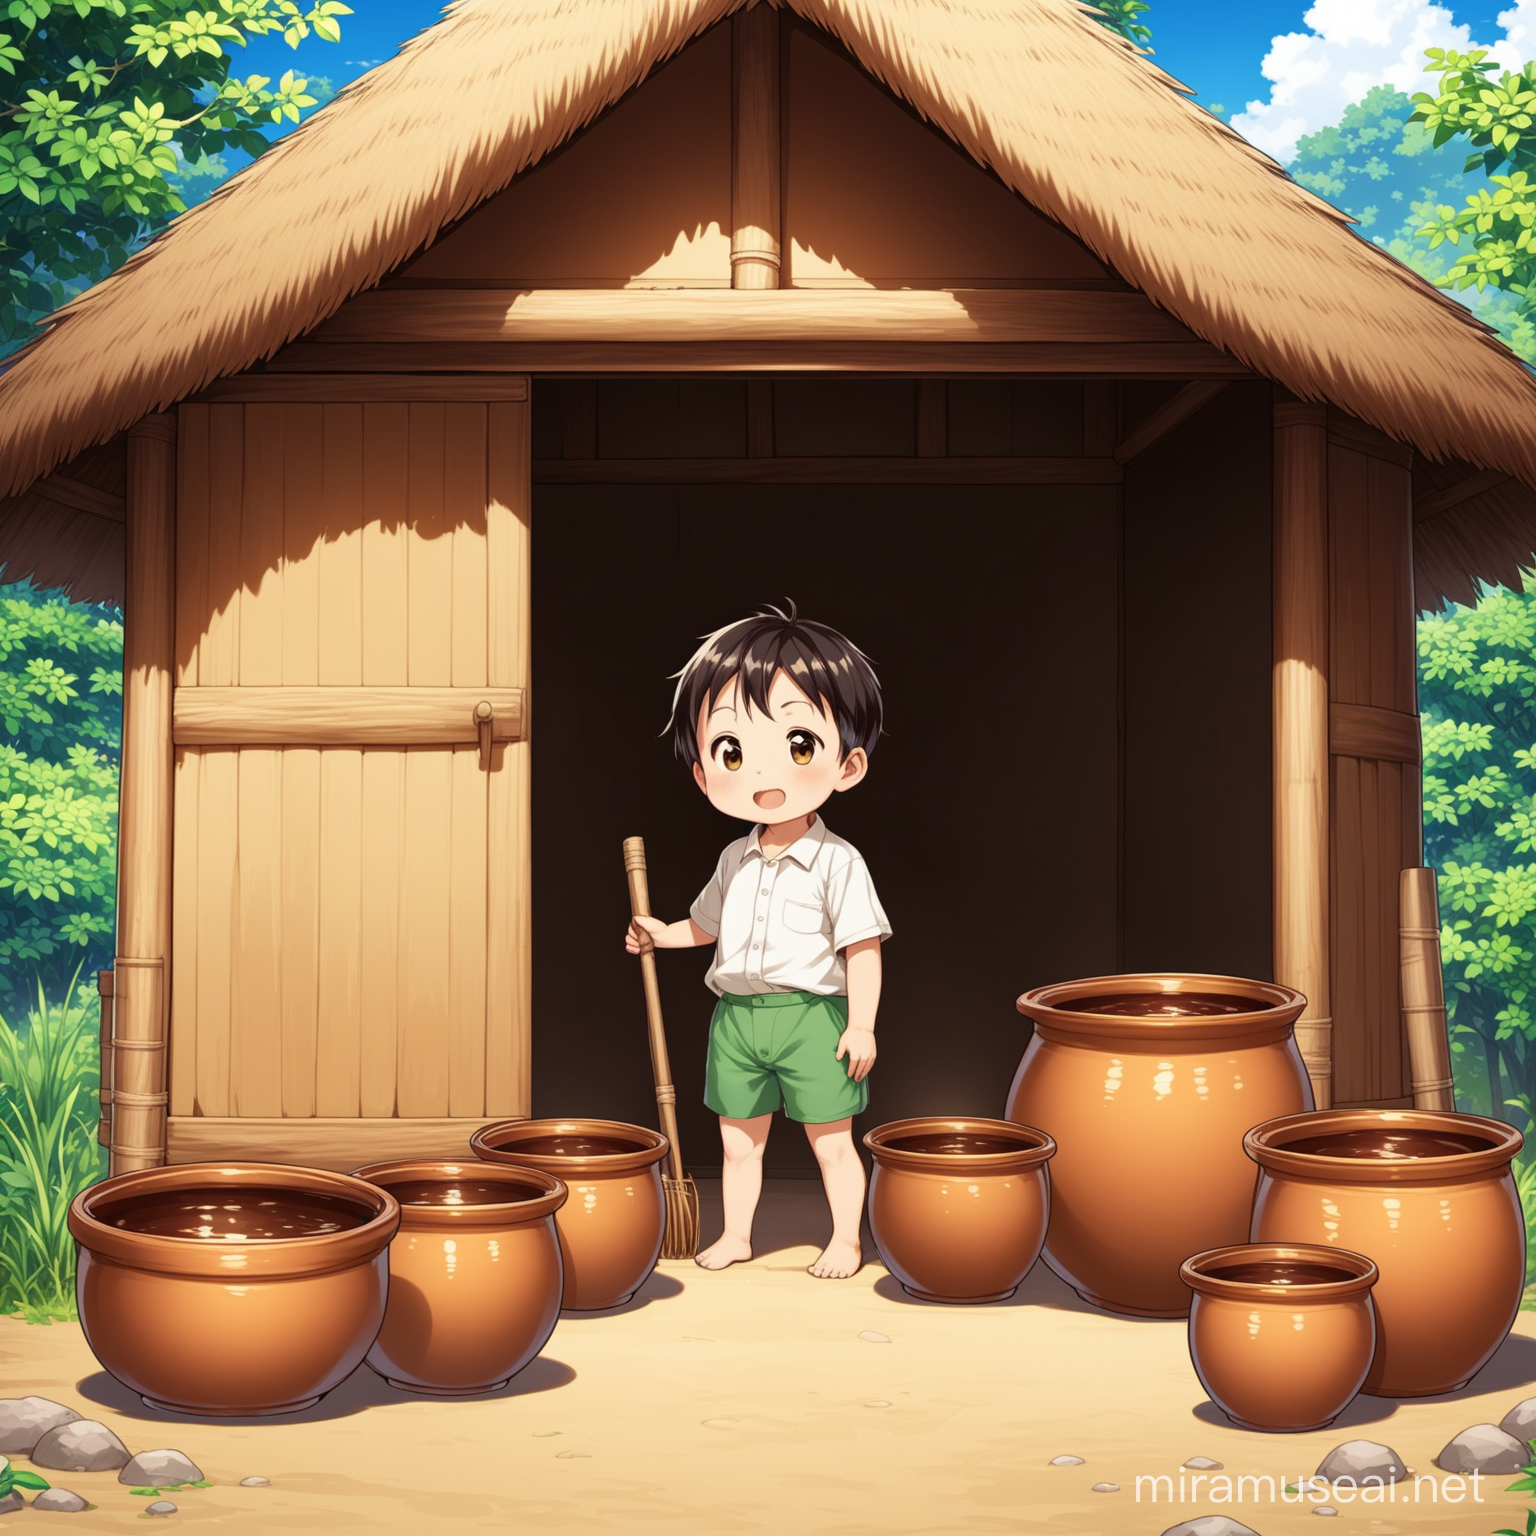 Generate animation picture of a small boy of six years in an hut that has one big pots and three small pots